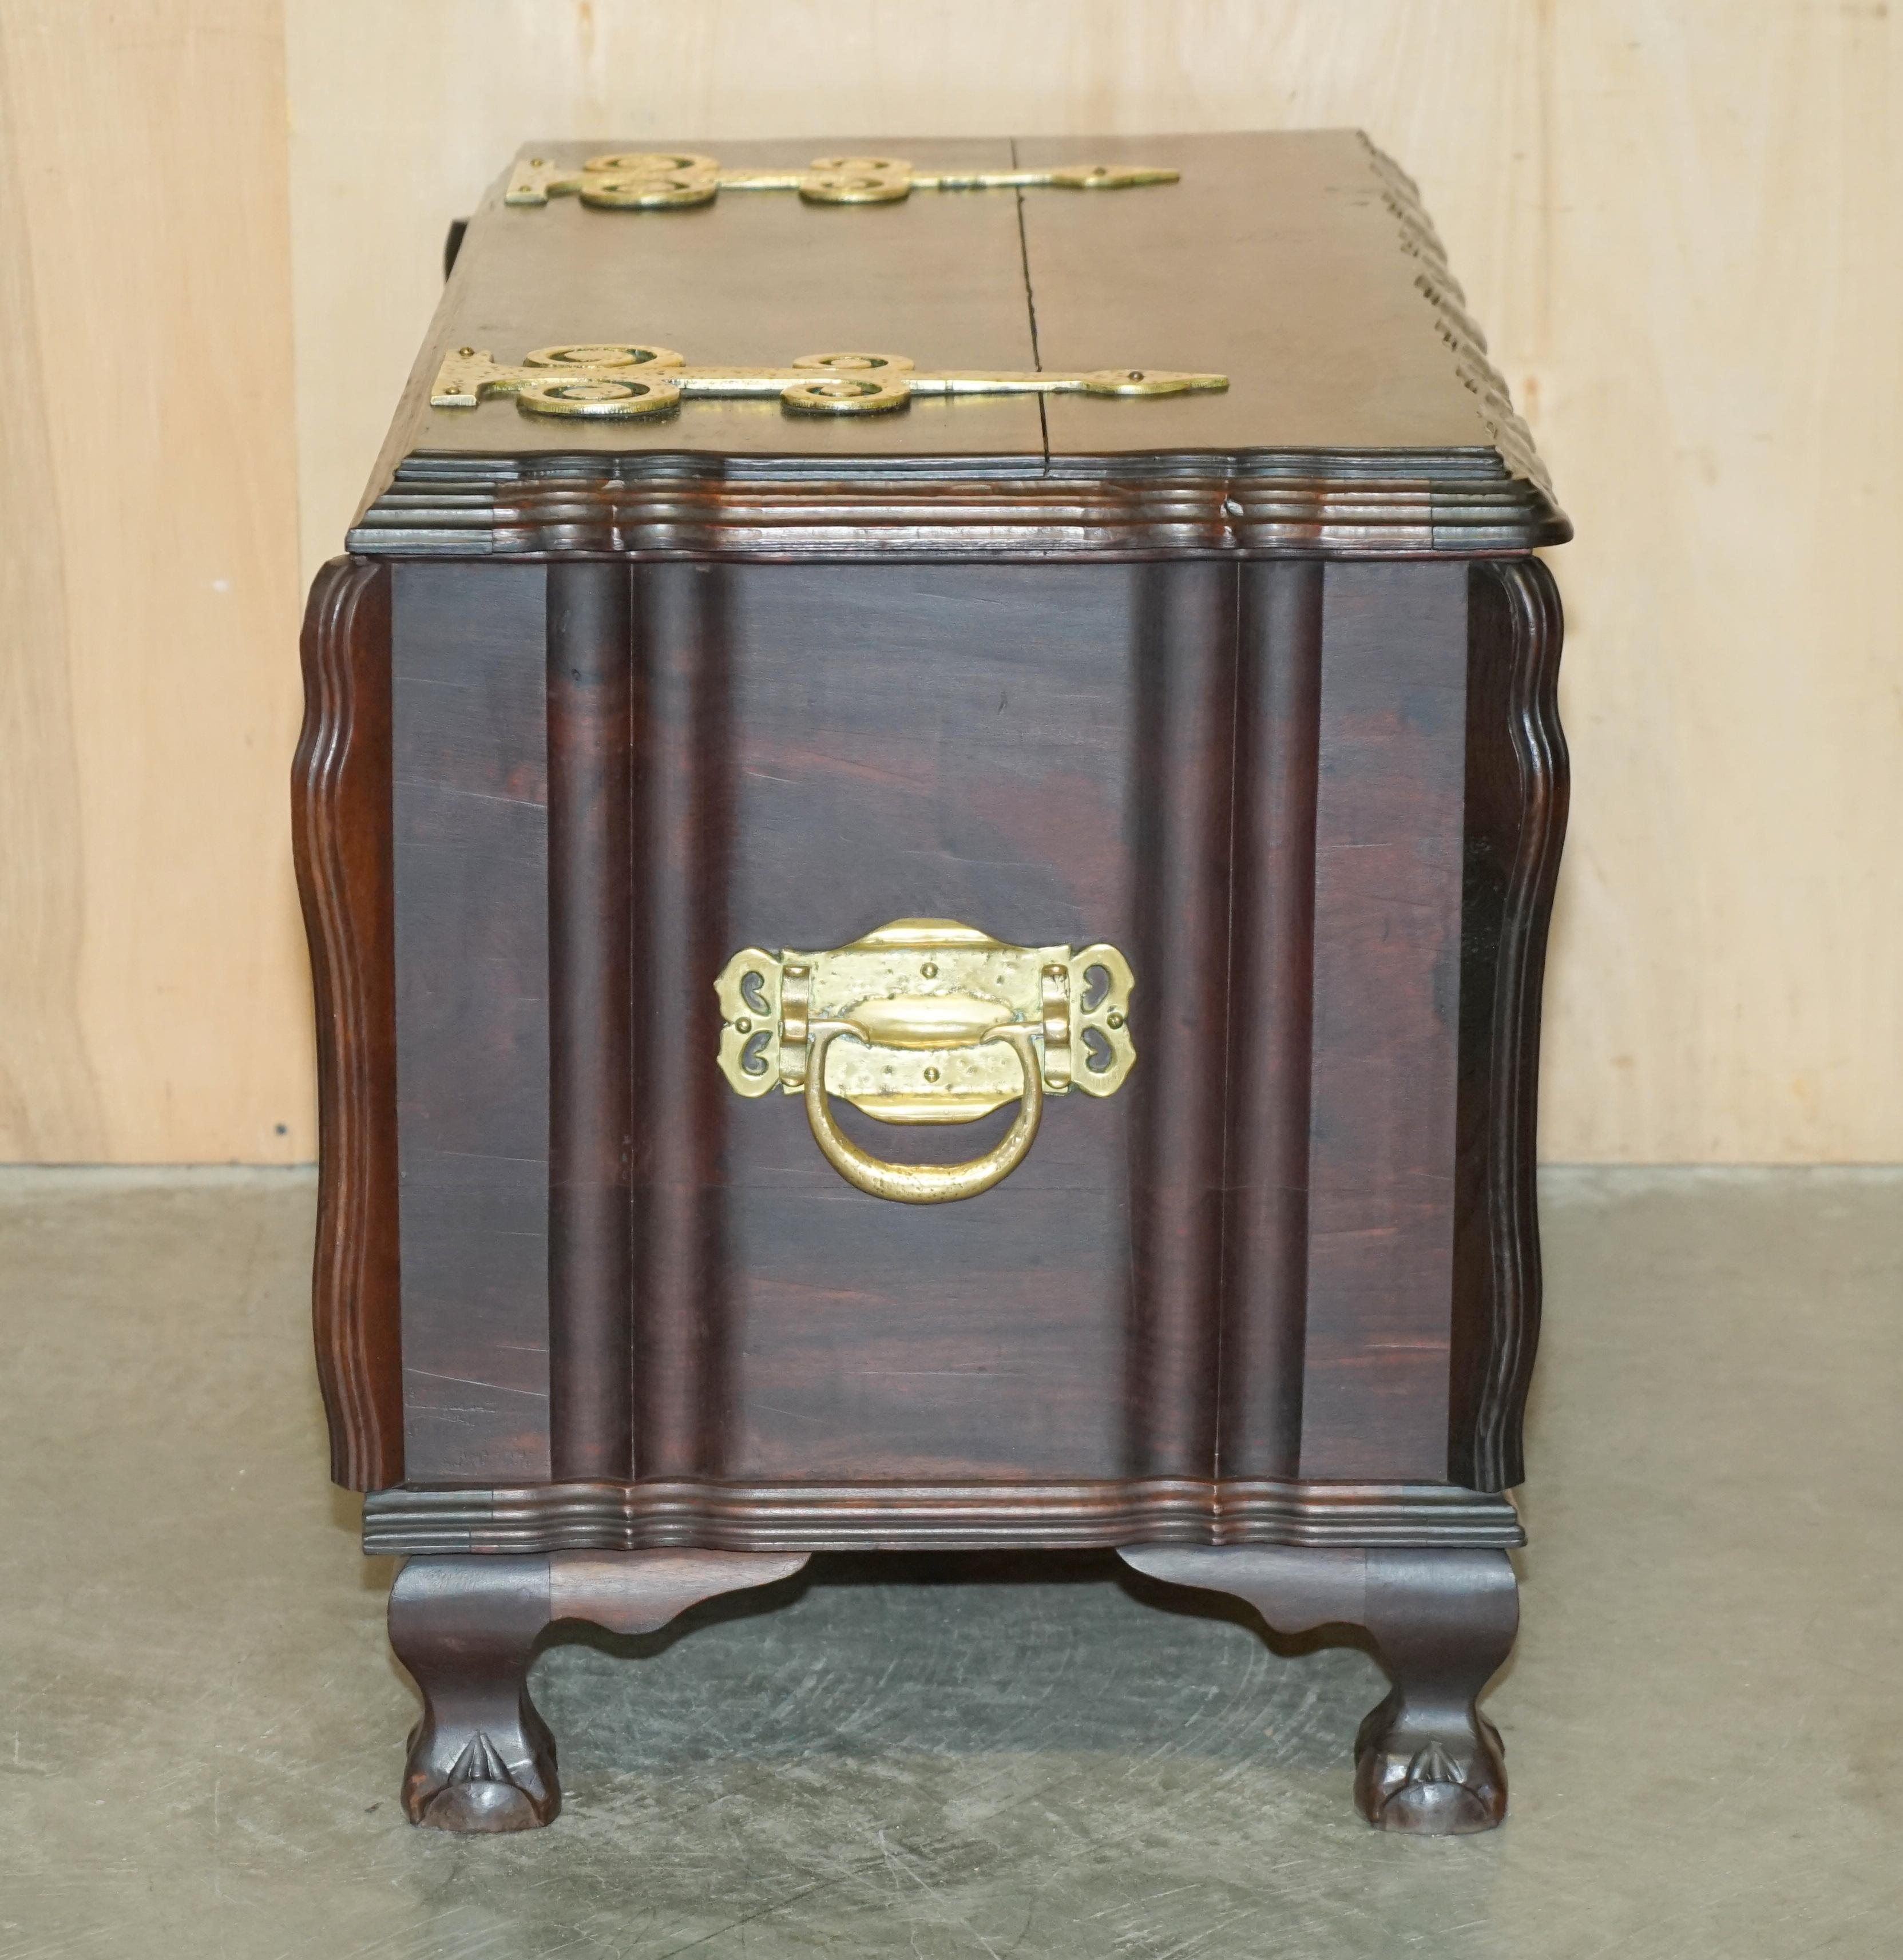 ViNTAGE HAND CARVED HARDWOOD TRUNK OR CHEST WITH ORNATE OVERSIZED BRASS FITTINGS For Sale 4